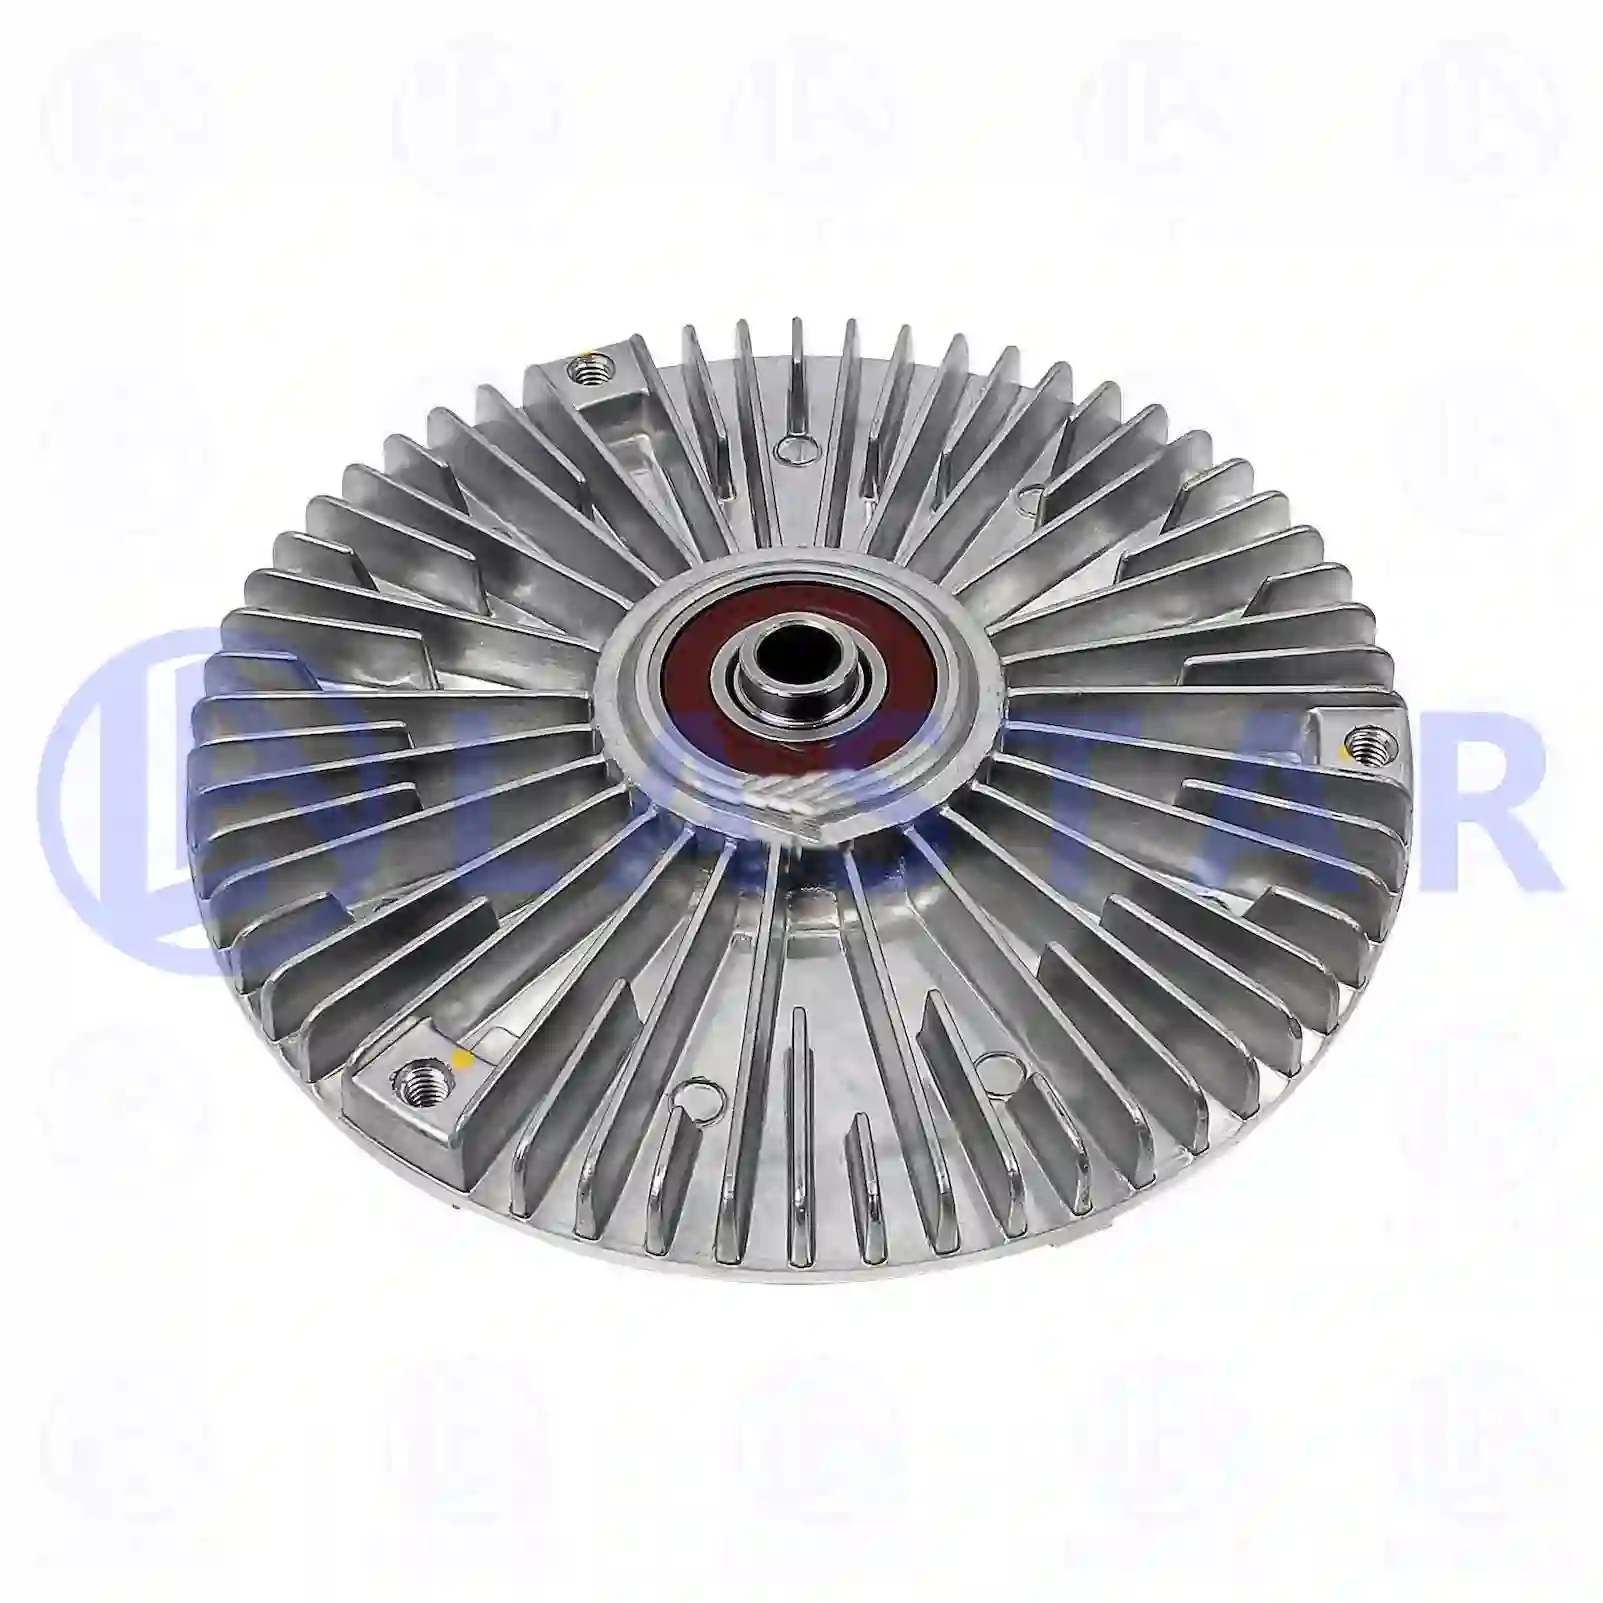 Fan clutch, 77708088, 2003702, 00020037 ||  77708088 Lastar Spare Part | Truck Spare Parts, Auotomotive Spare Parts Fan clutch, 77708088, 2003702, 00020037 ||  77708088 Lastar Spare Part | Truck Spare Parts, Auotomotive Spare Parts